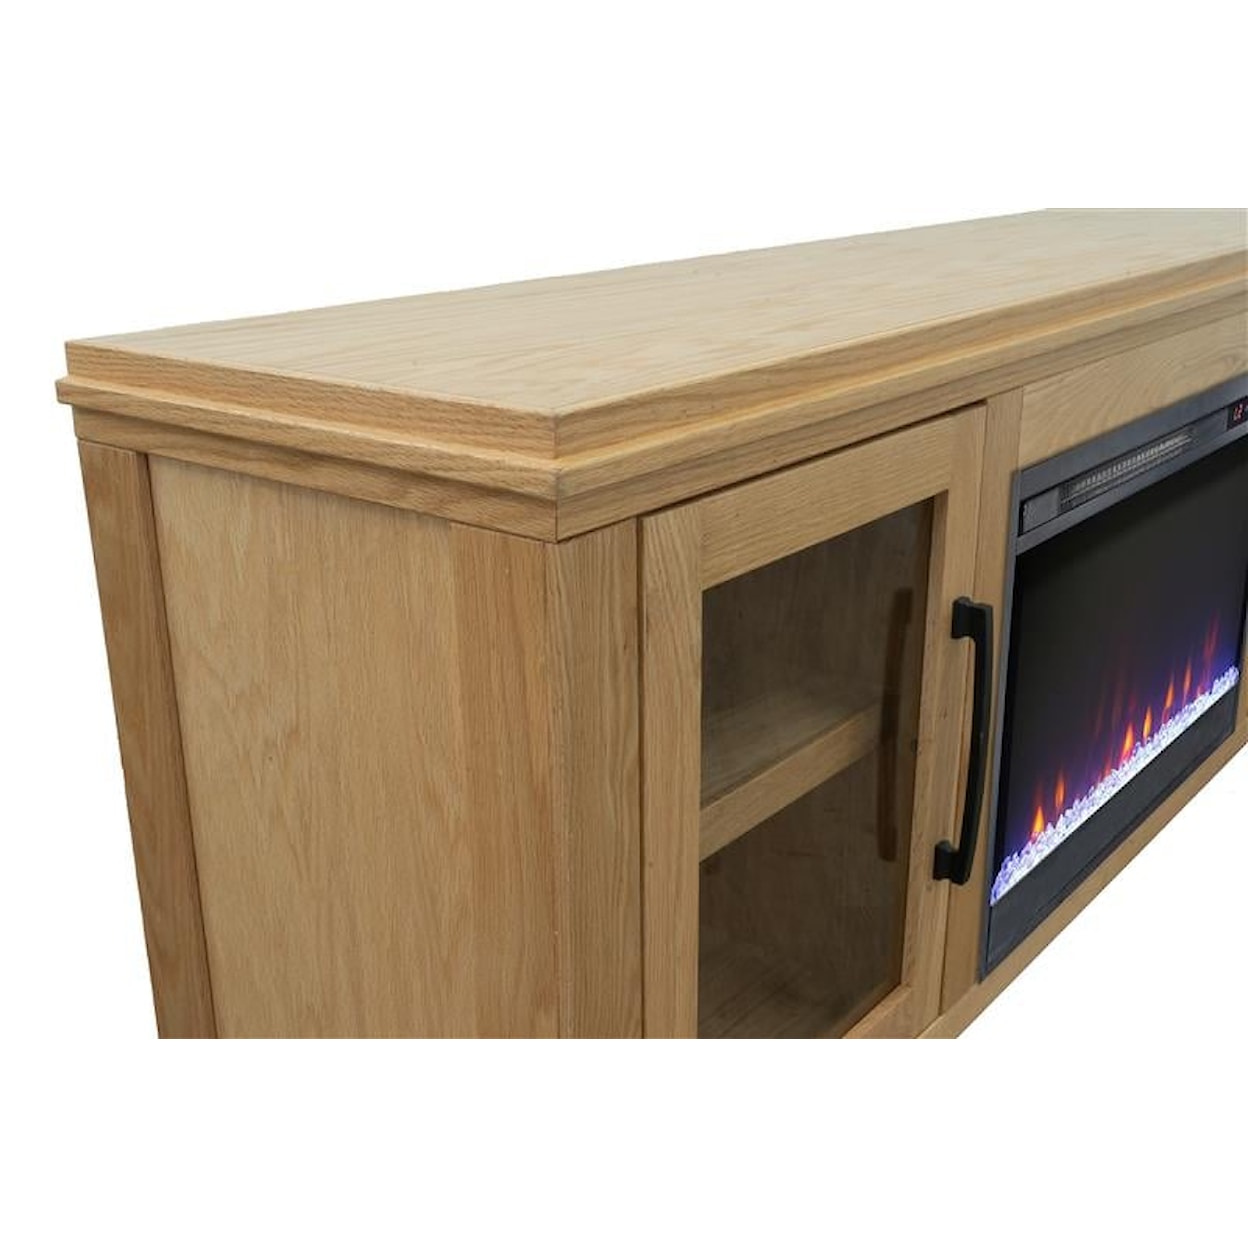 Legends Furniture Tybee 69" Fireplace TV Stand